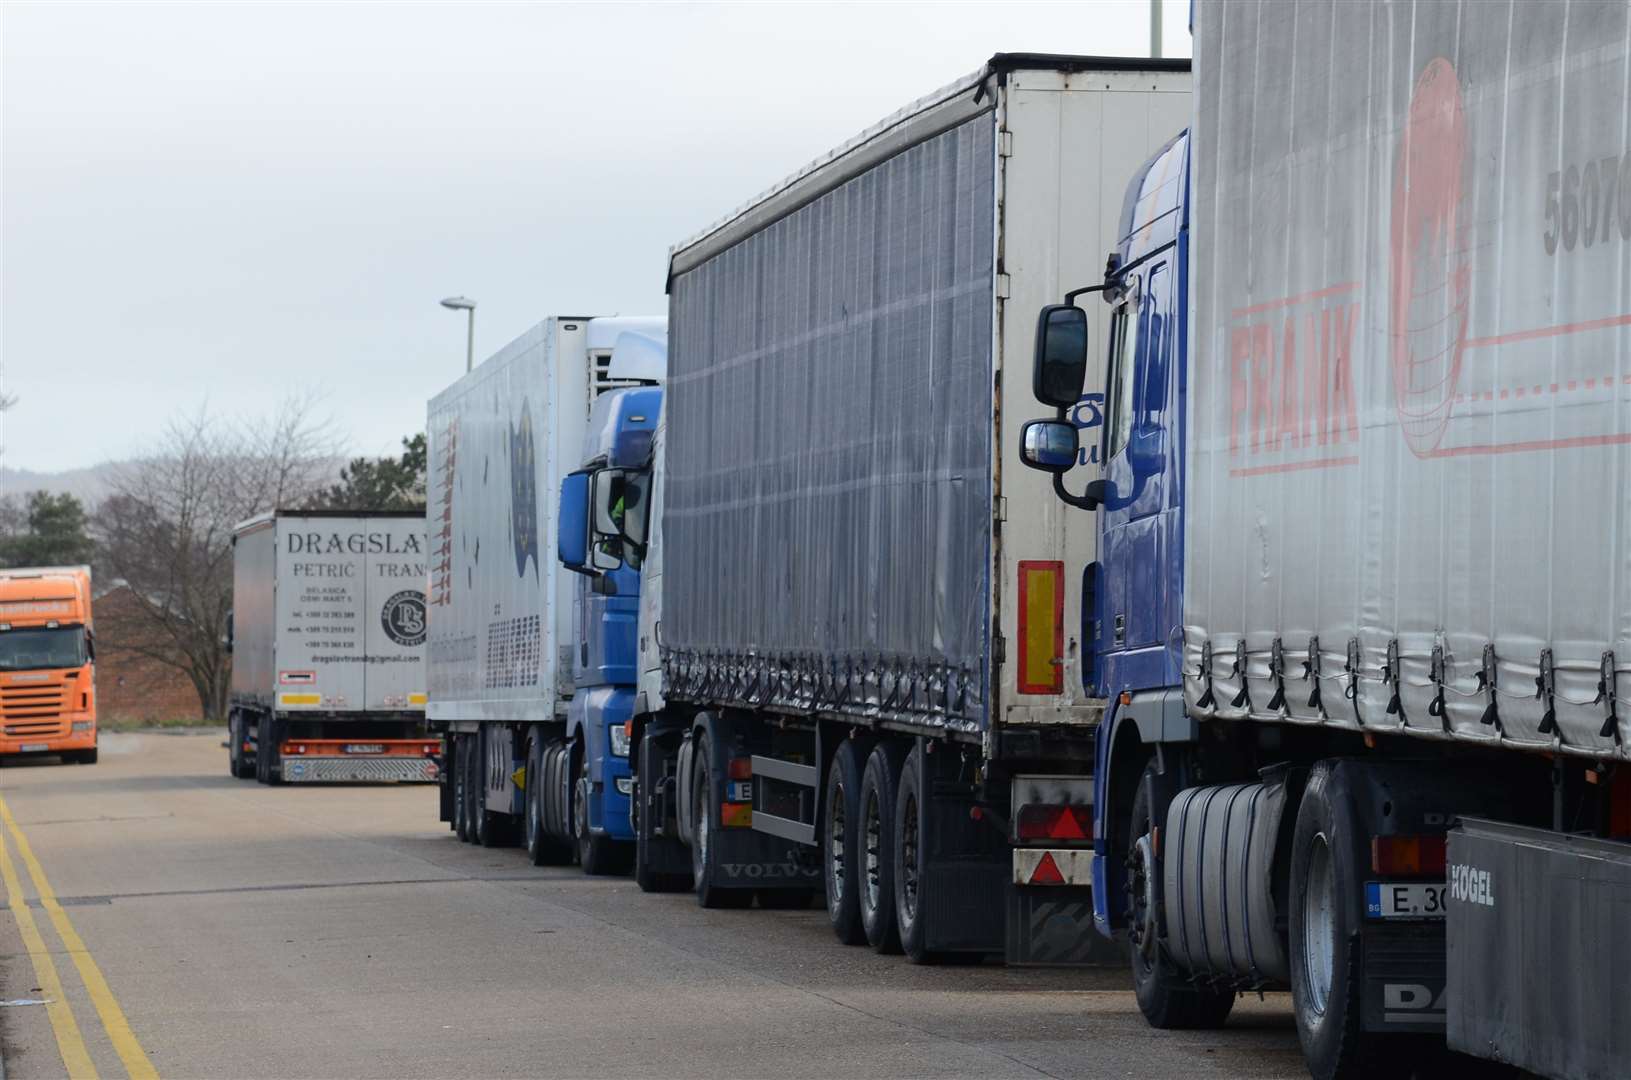 The lorry site in Ashford could potentially cater for thousands of lorries